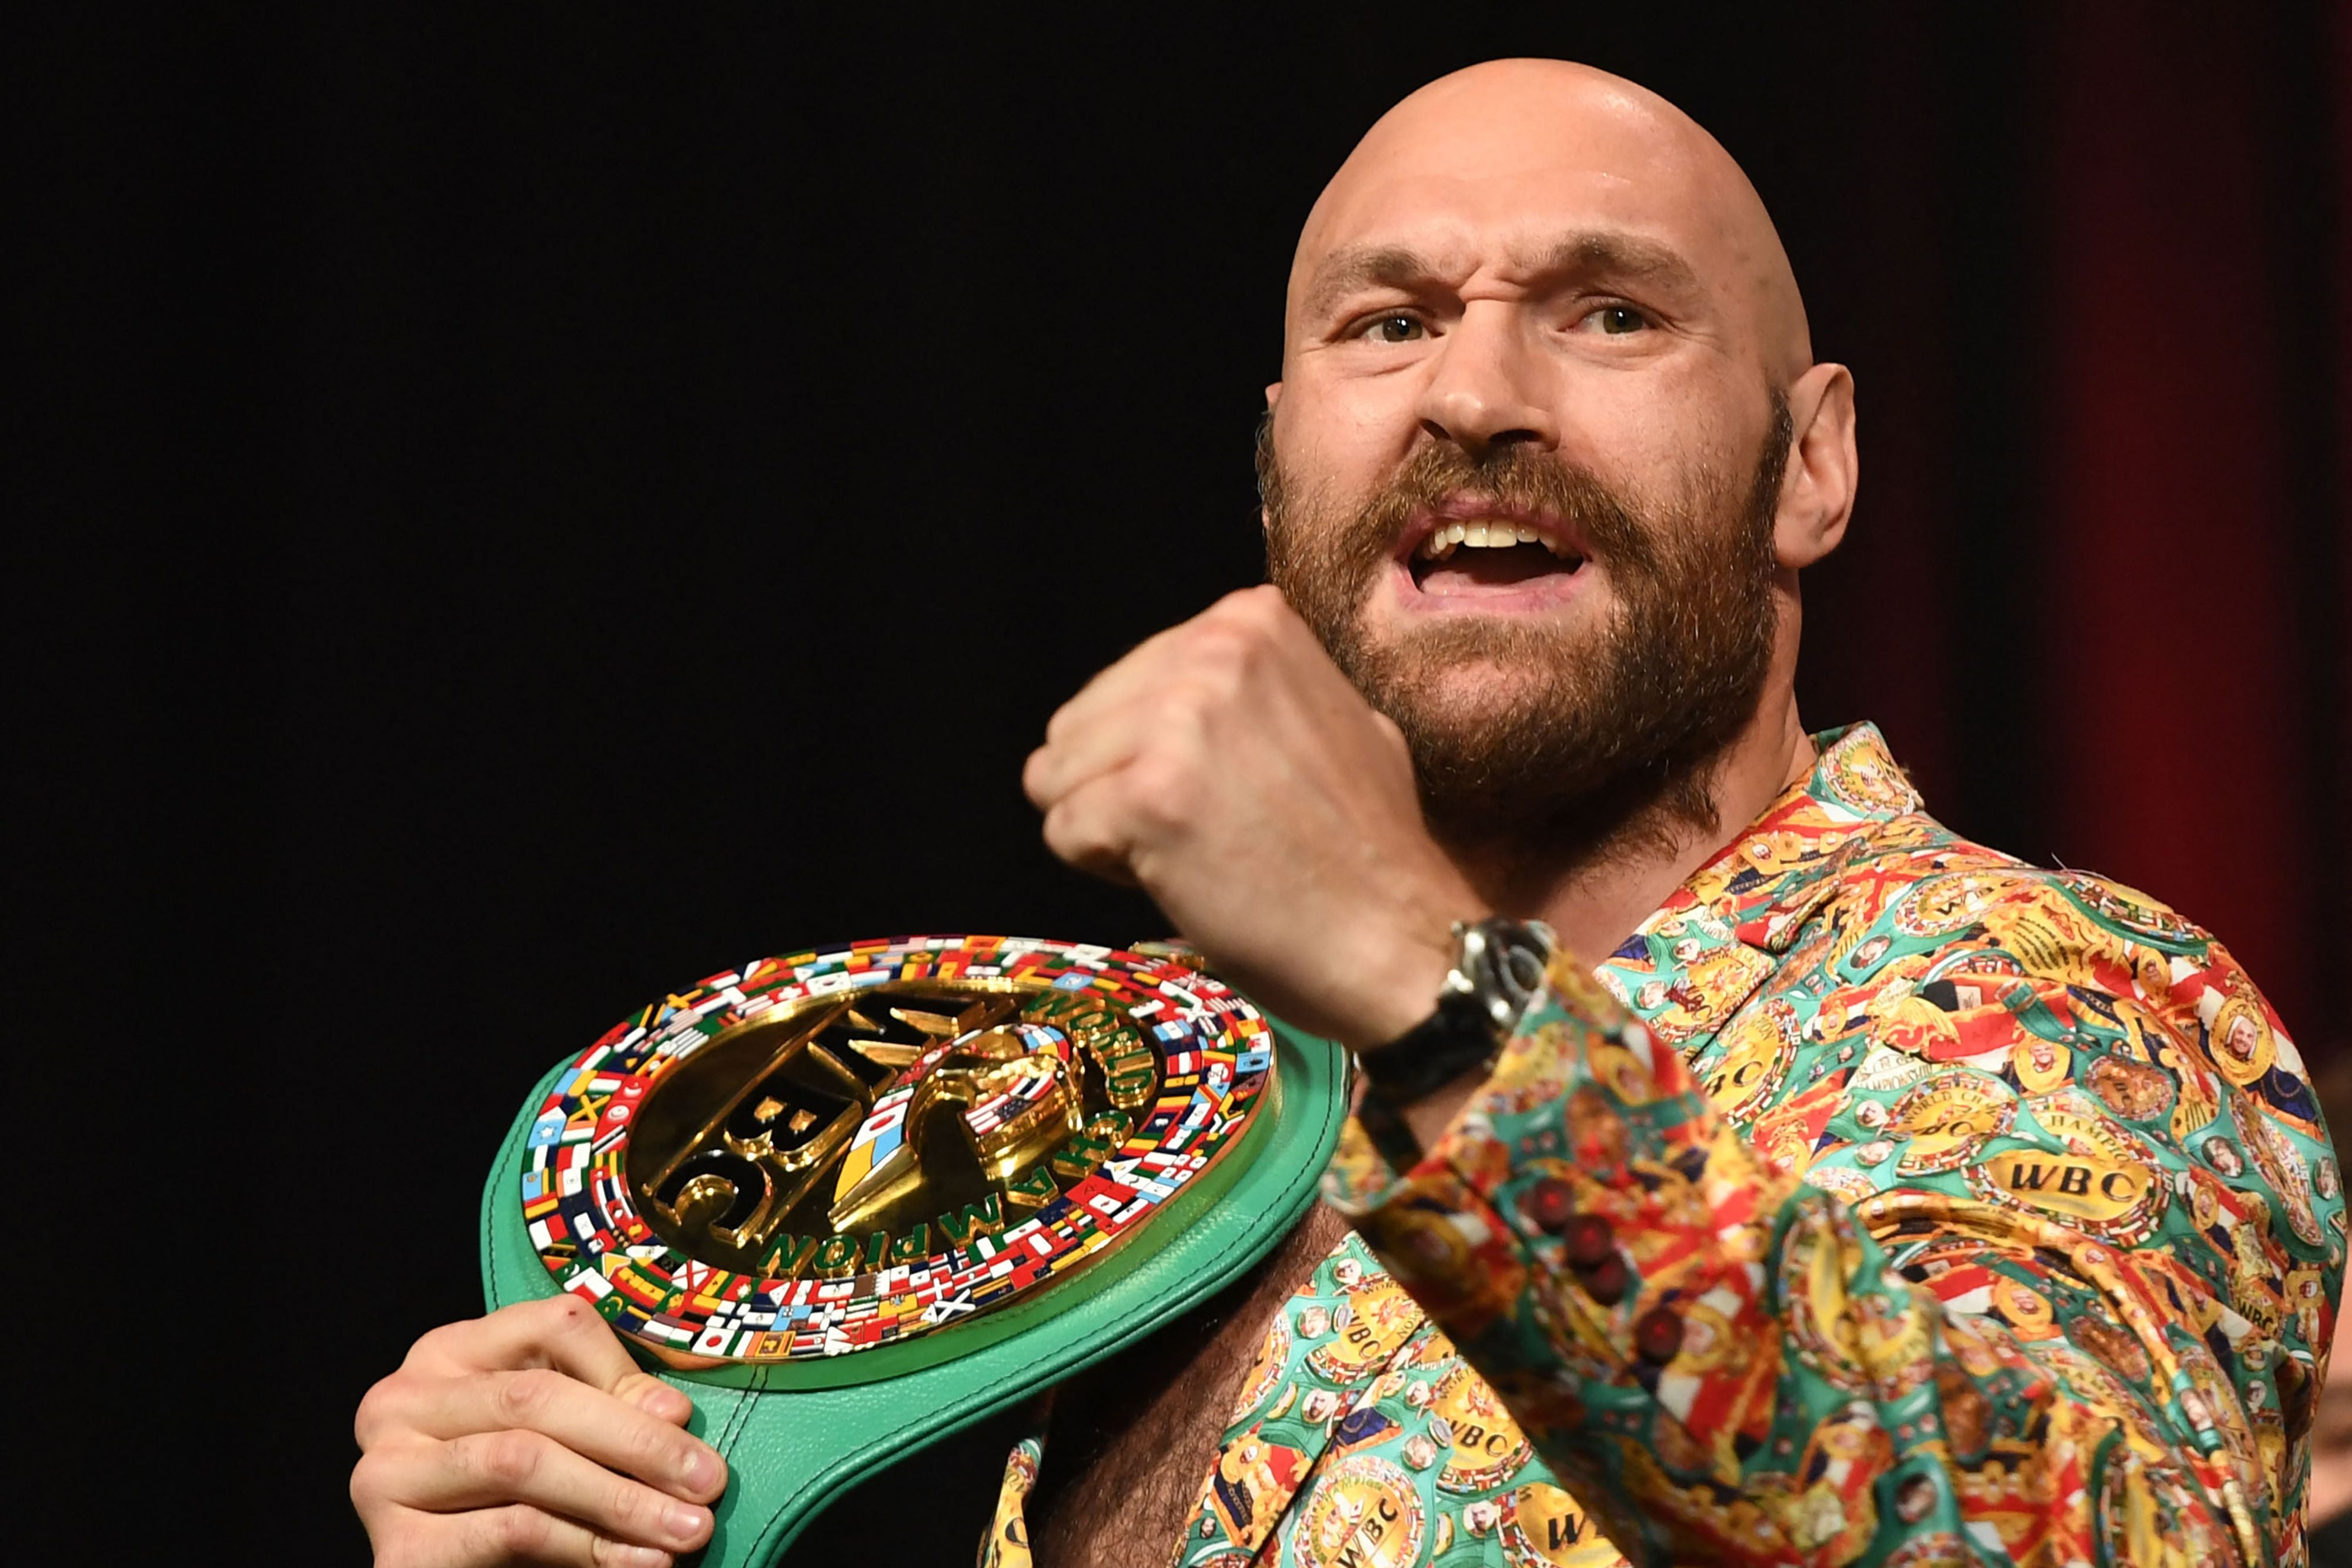 Tyson Fury defends his WBC heavyweight championship in his third fight against Deontay Wilder on Saturday